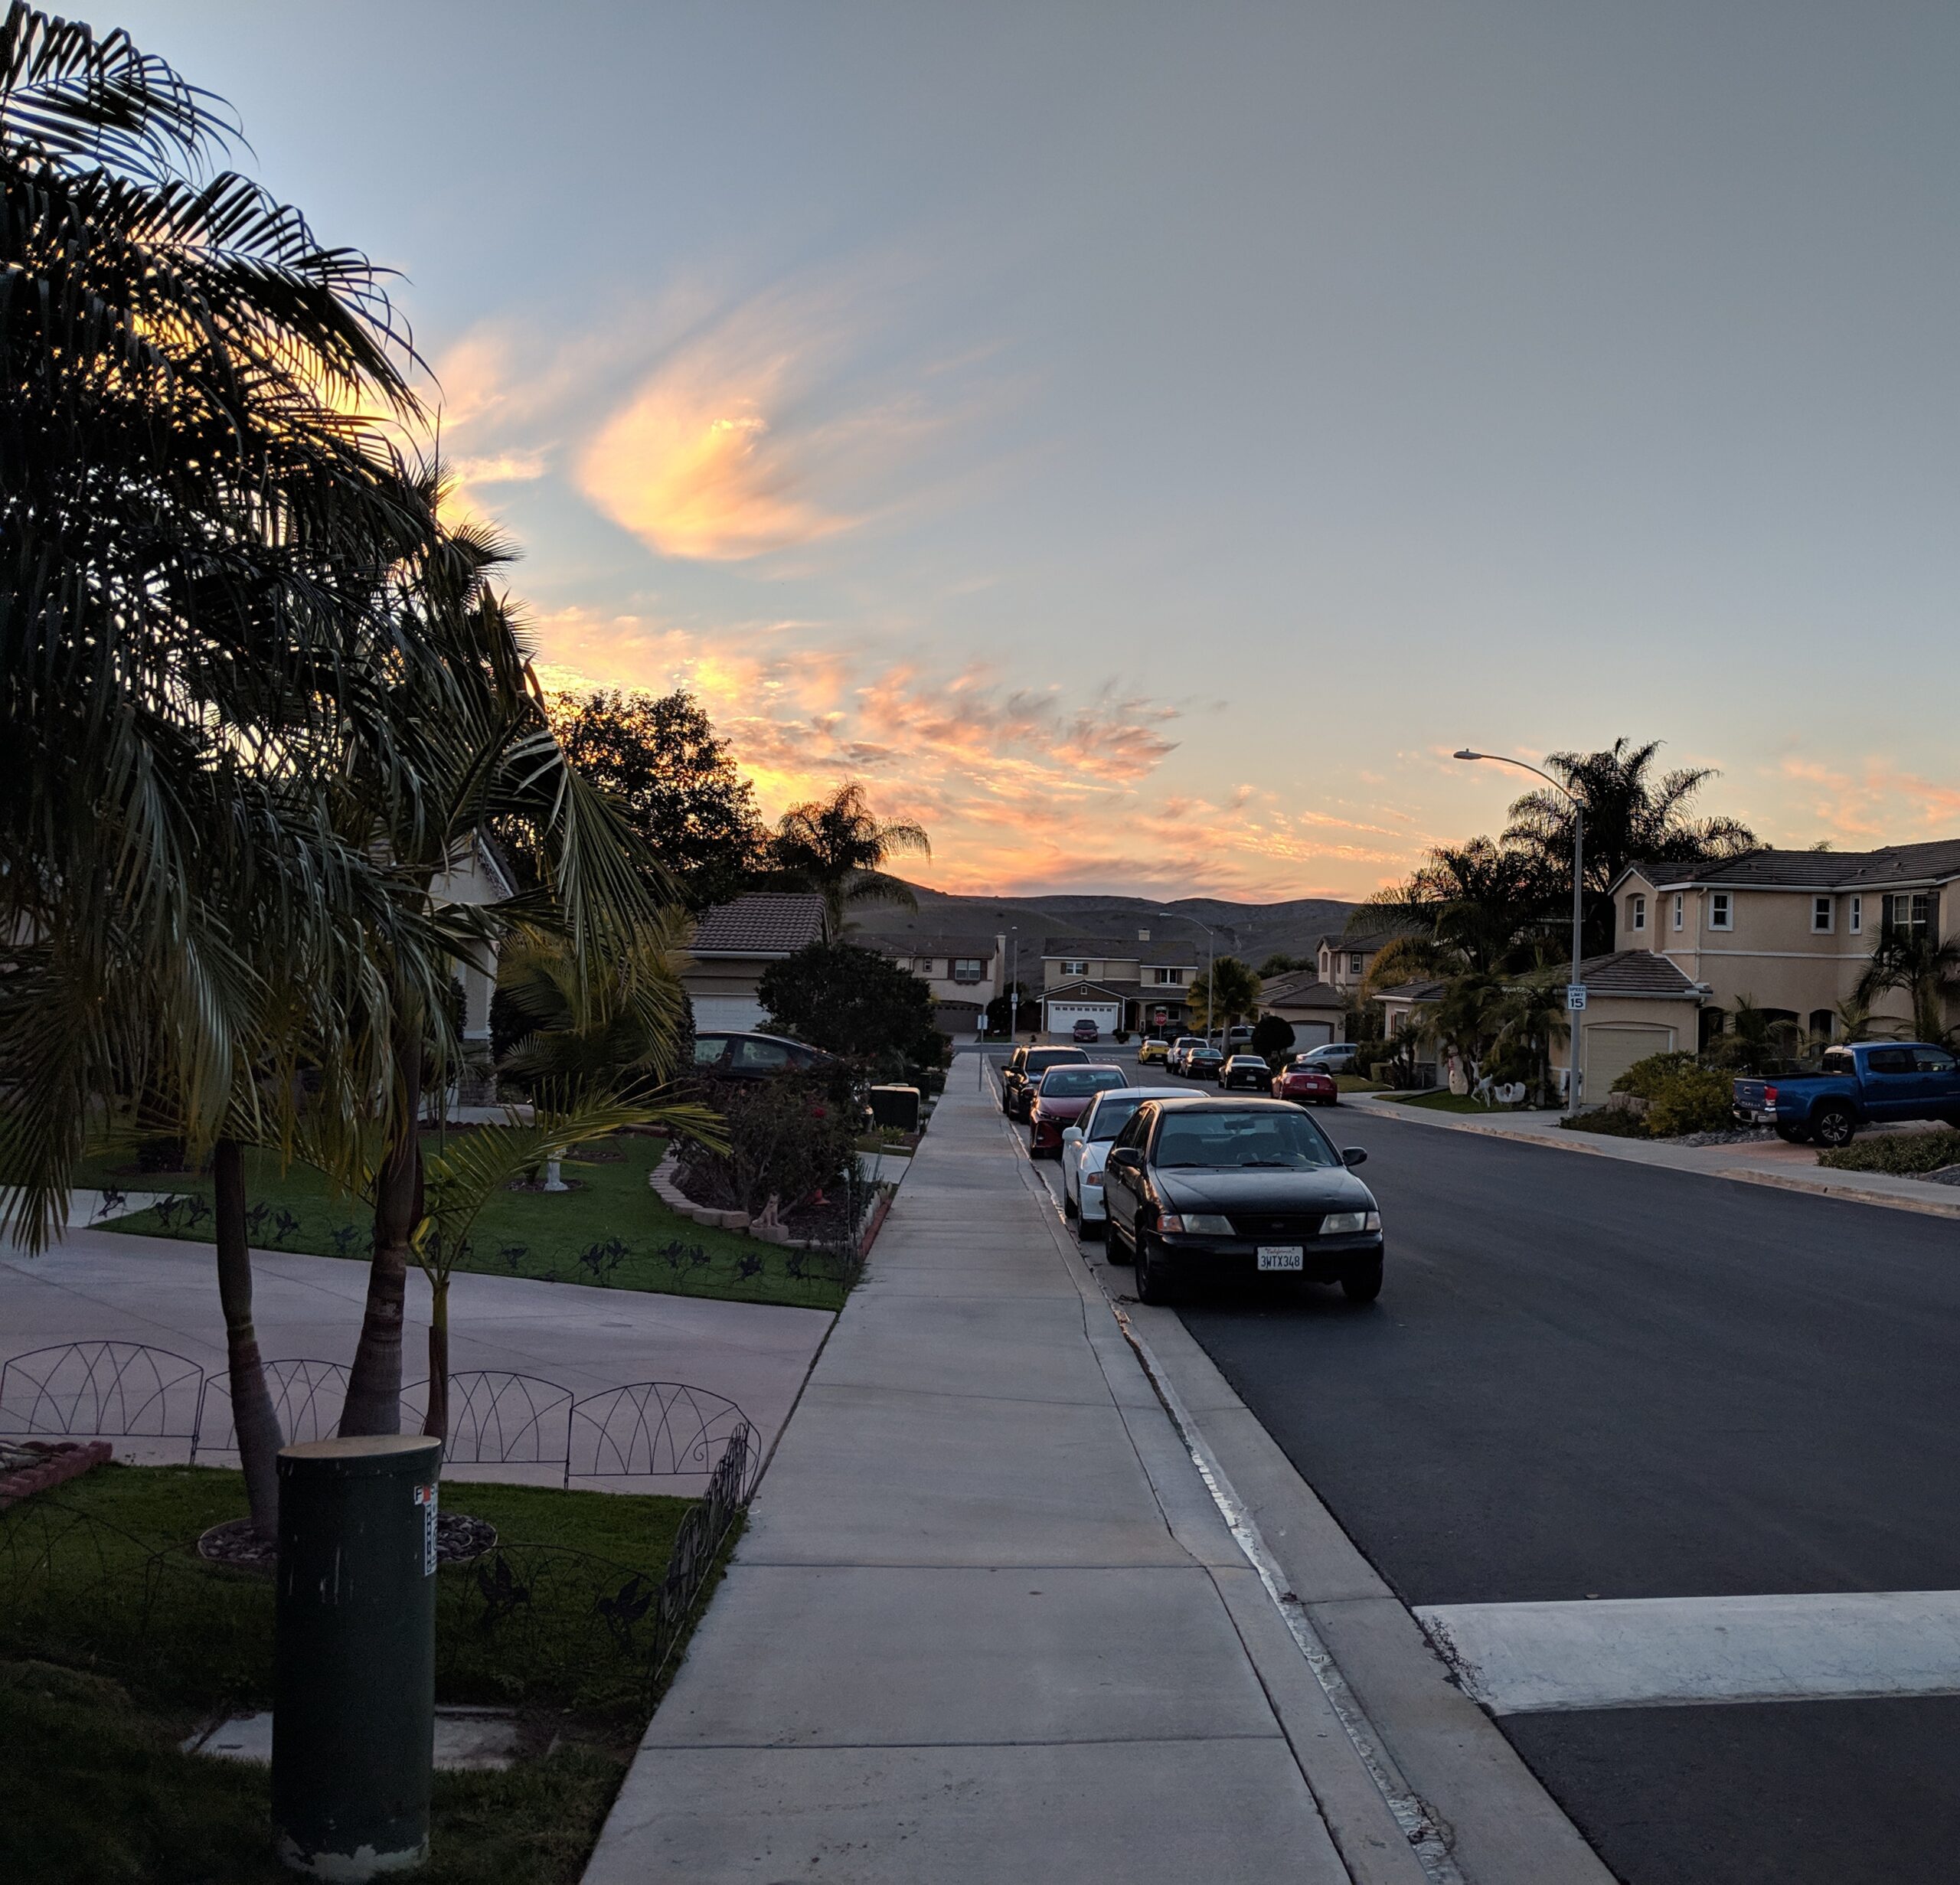 California suburb in early sunset